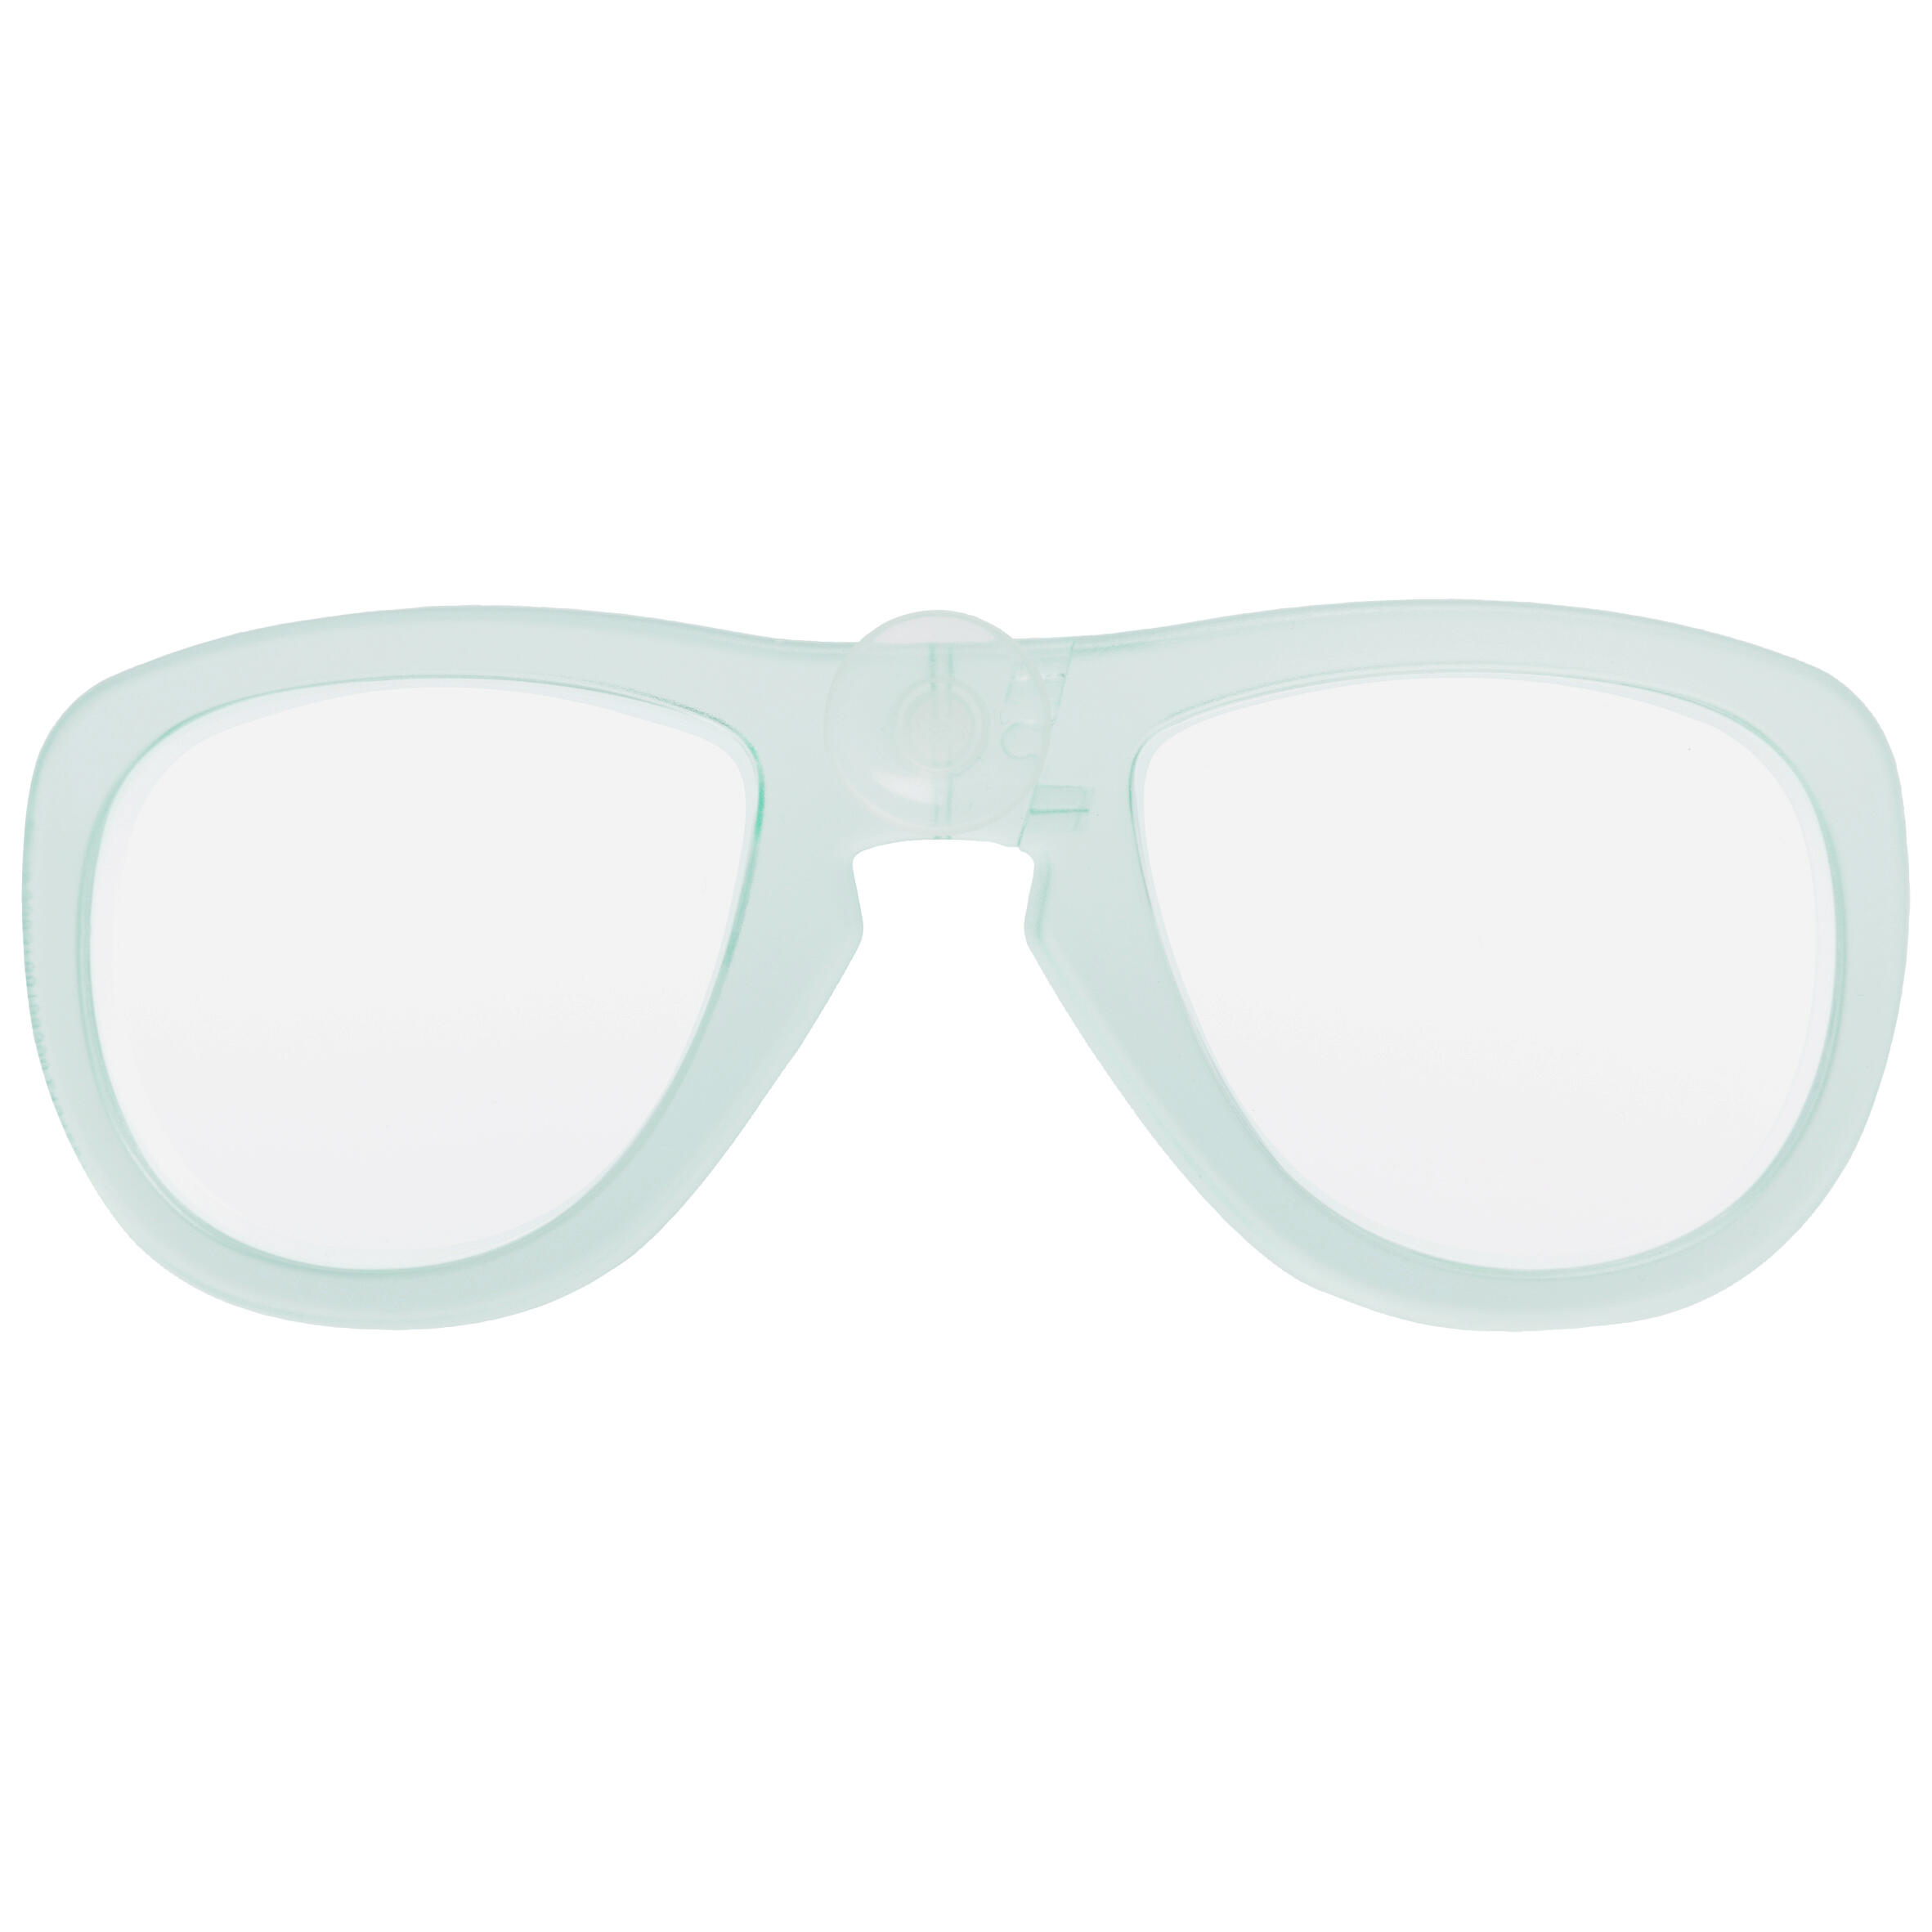 Right corrective lens for the short-sighted for transparent Easybreath masks M/G 5/7